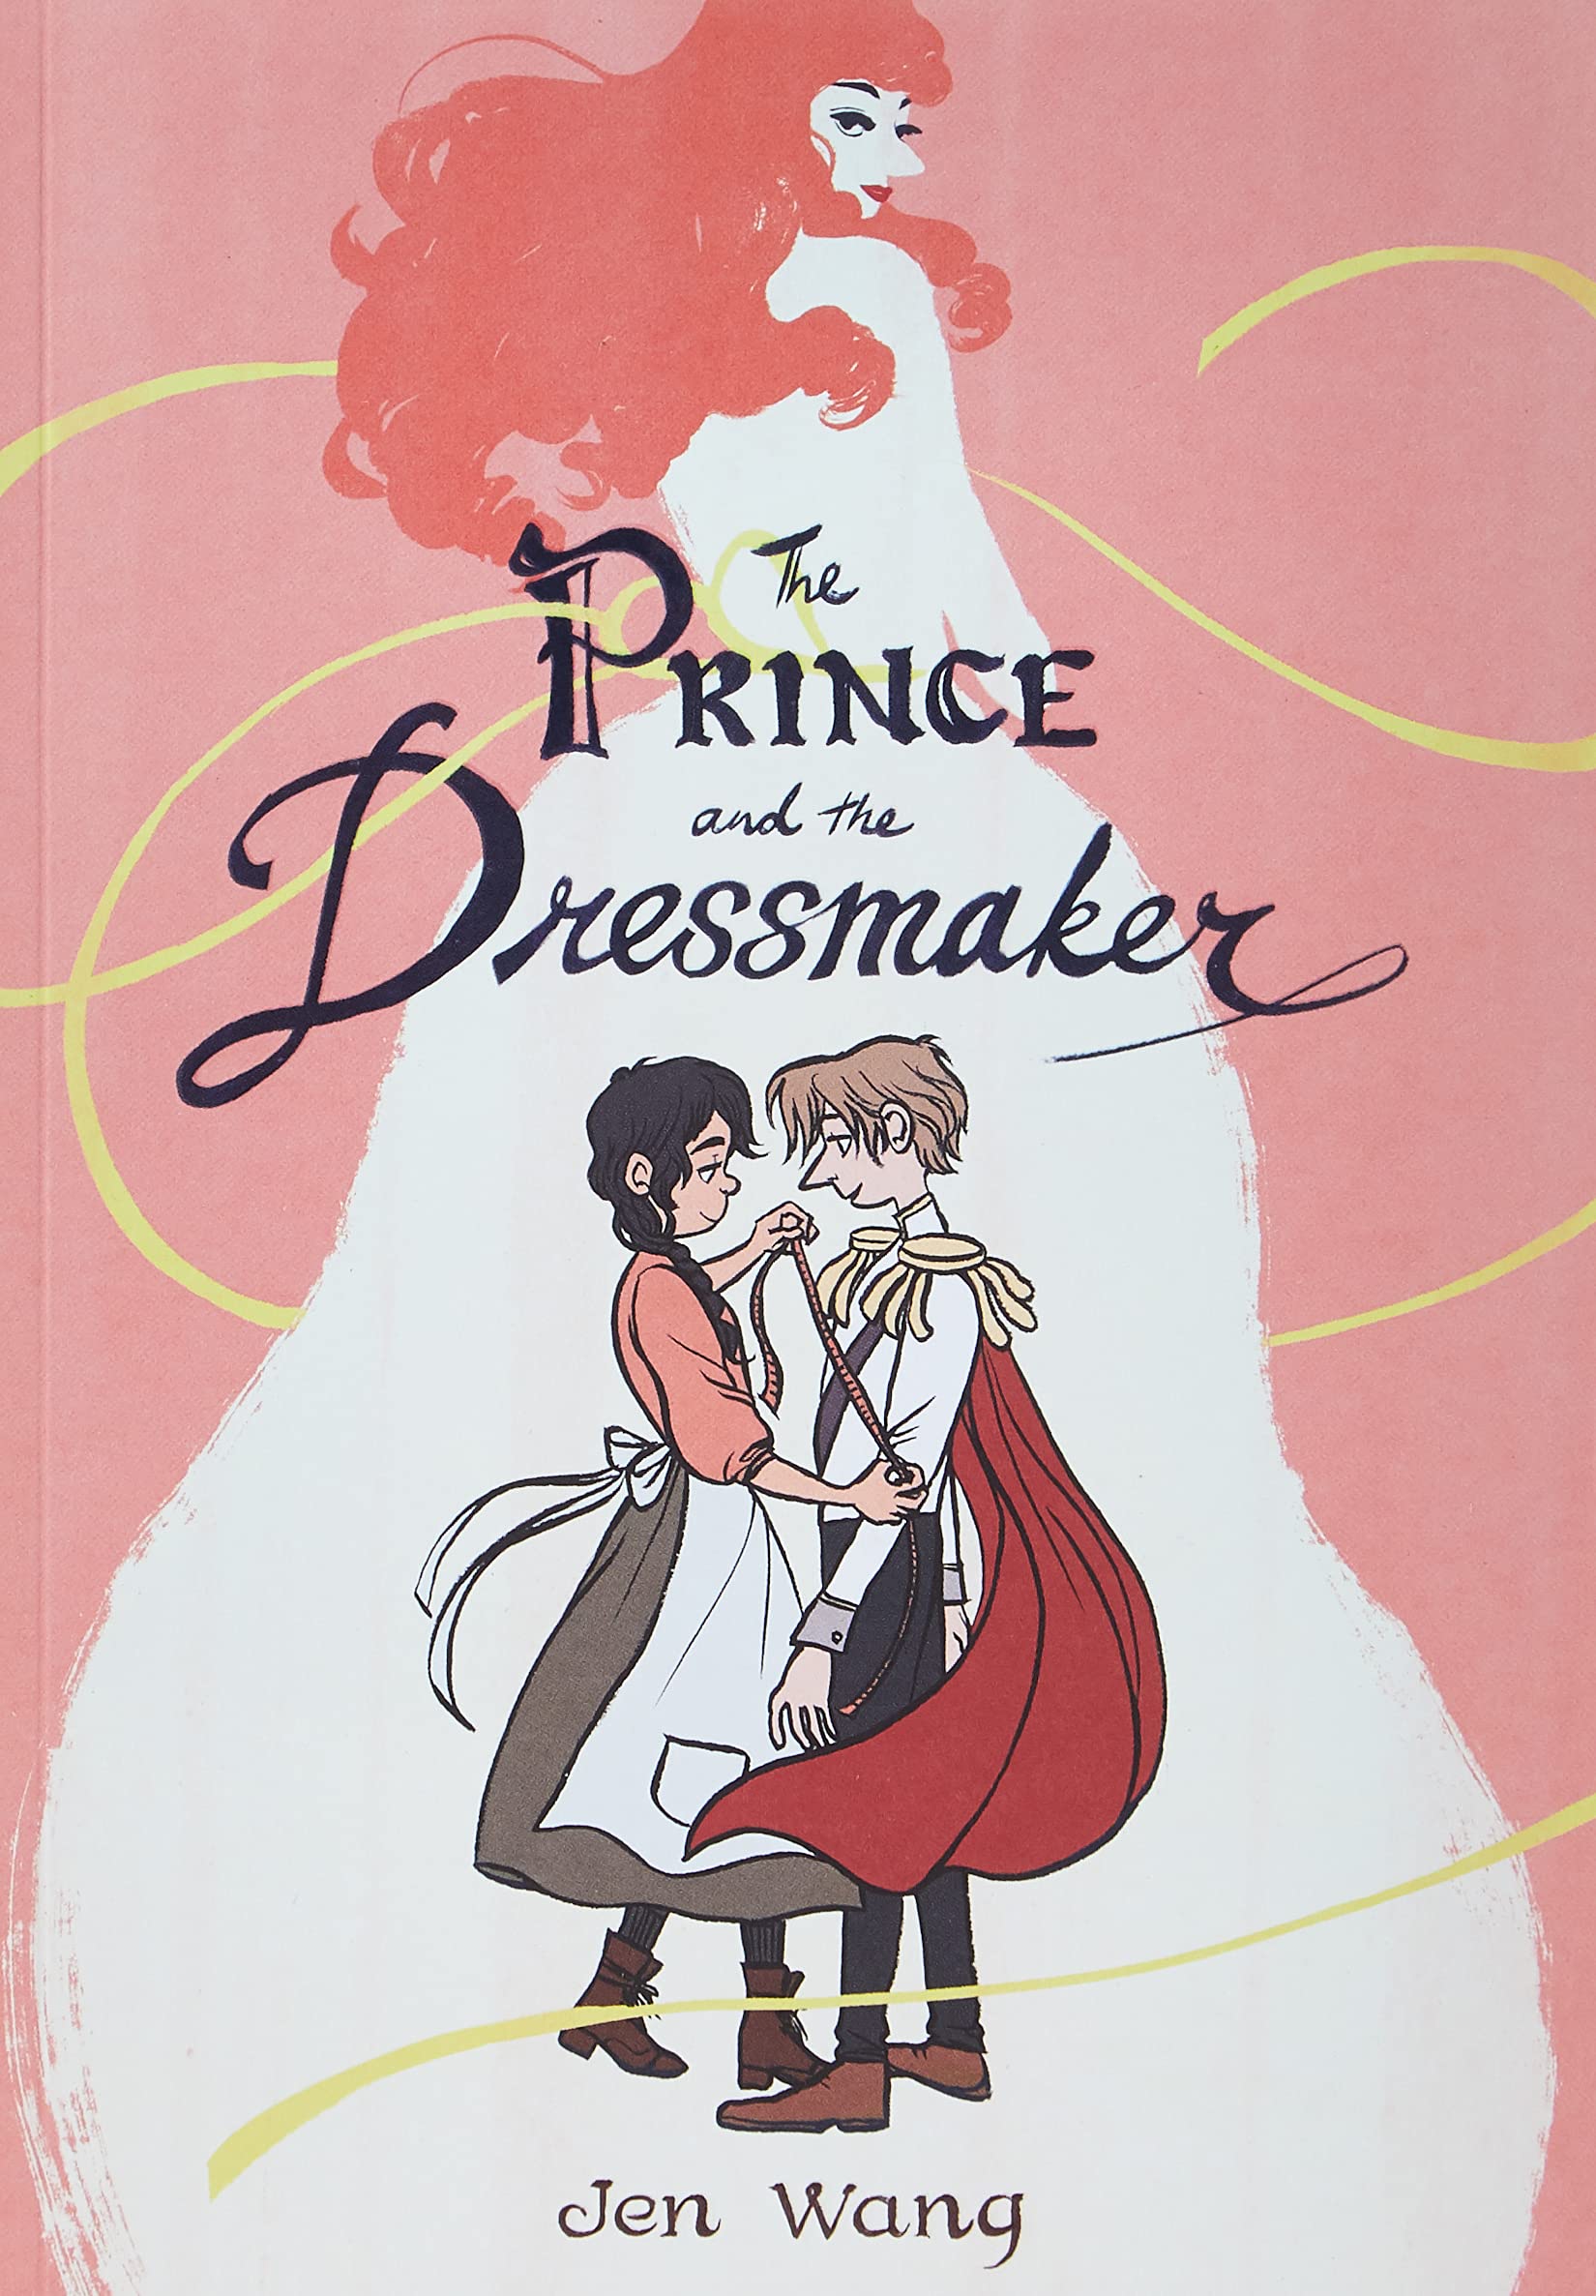 The prince and the dressmaker